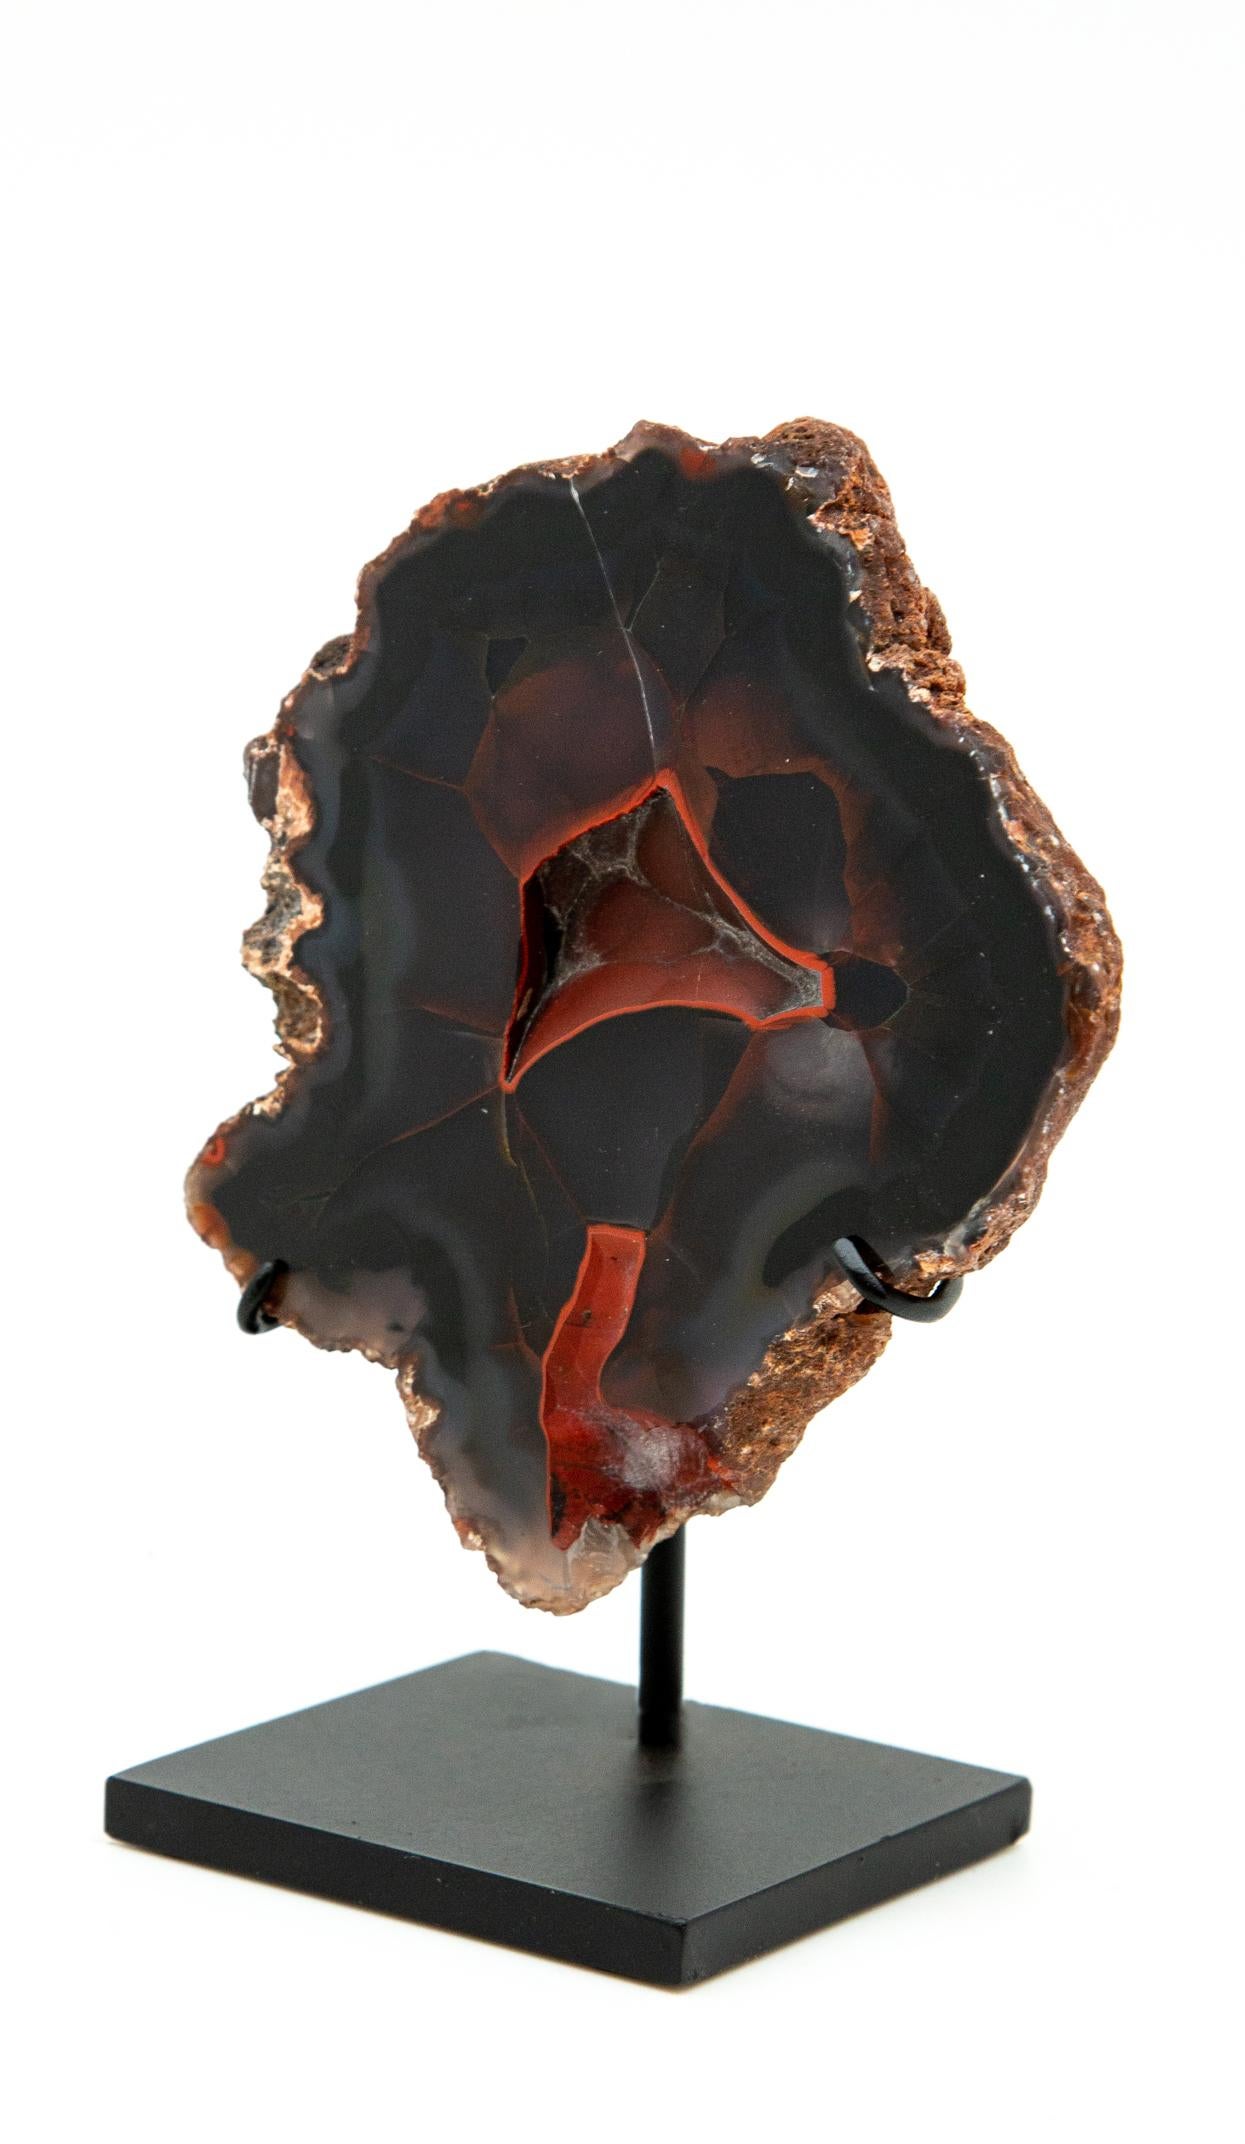 Mounted Red Fox Agate. Mounted Red Fox Agate on custom black metal stand. 6